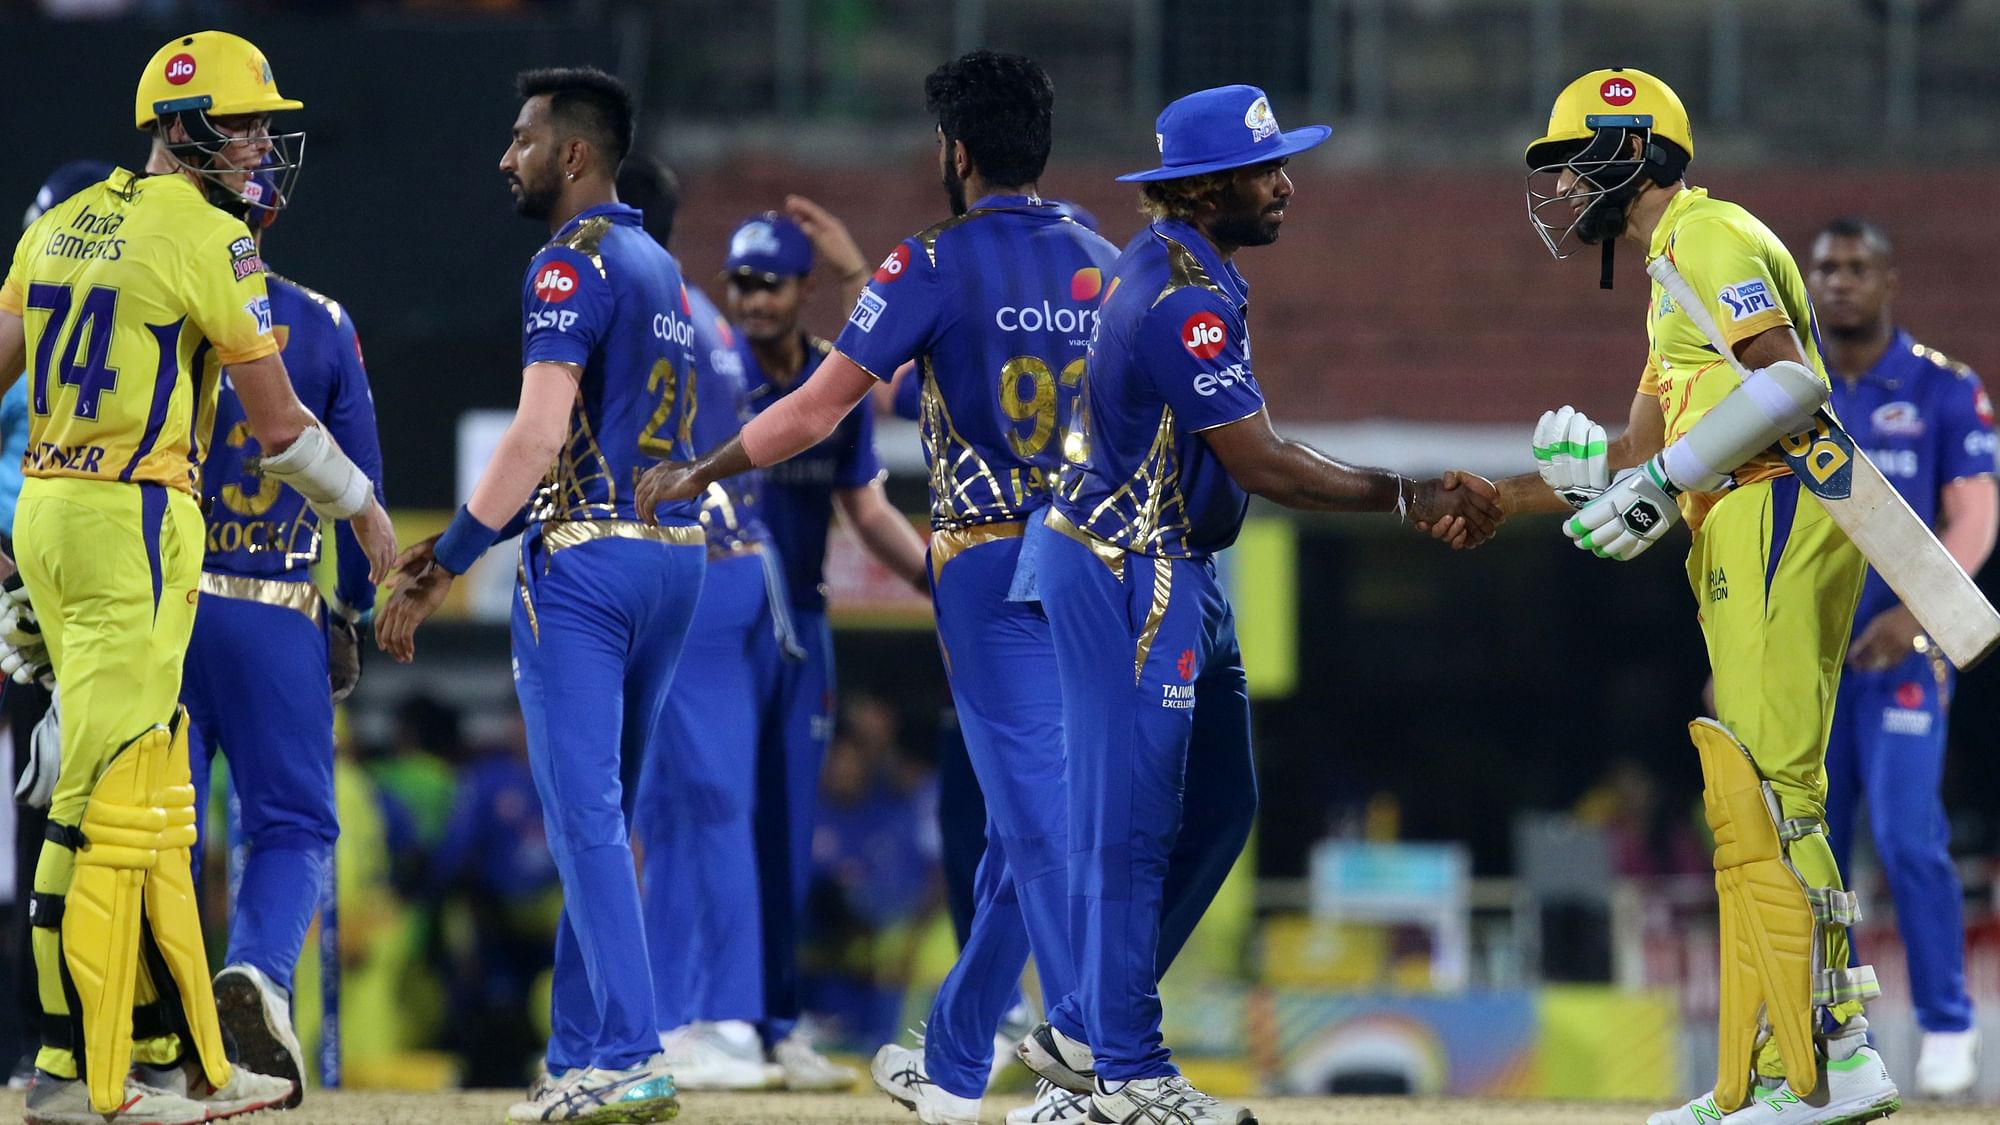 Chasing 156 for victory, Chennai Super Kings were bowled out for 109 against Mumbai Indians in Chennai on Friday.